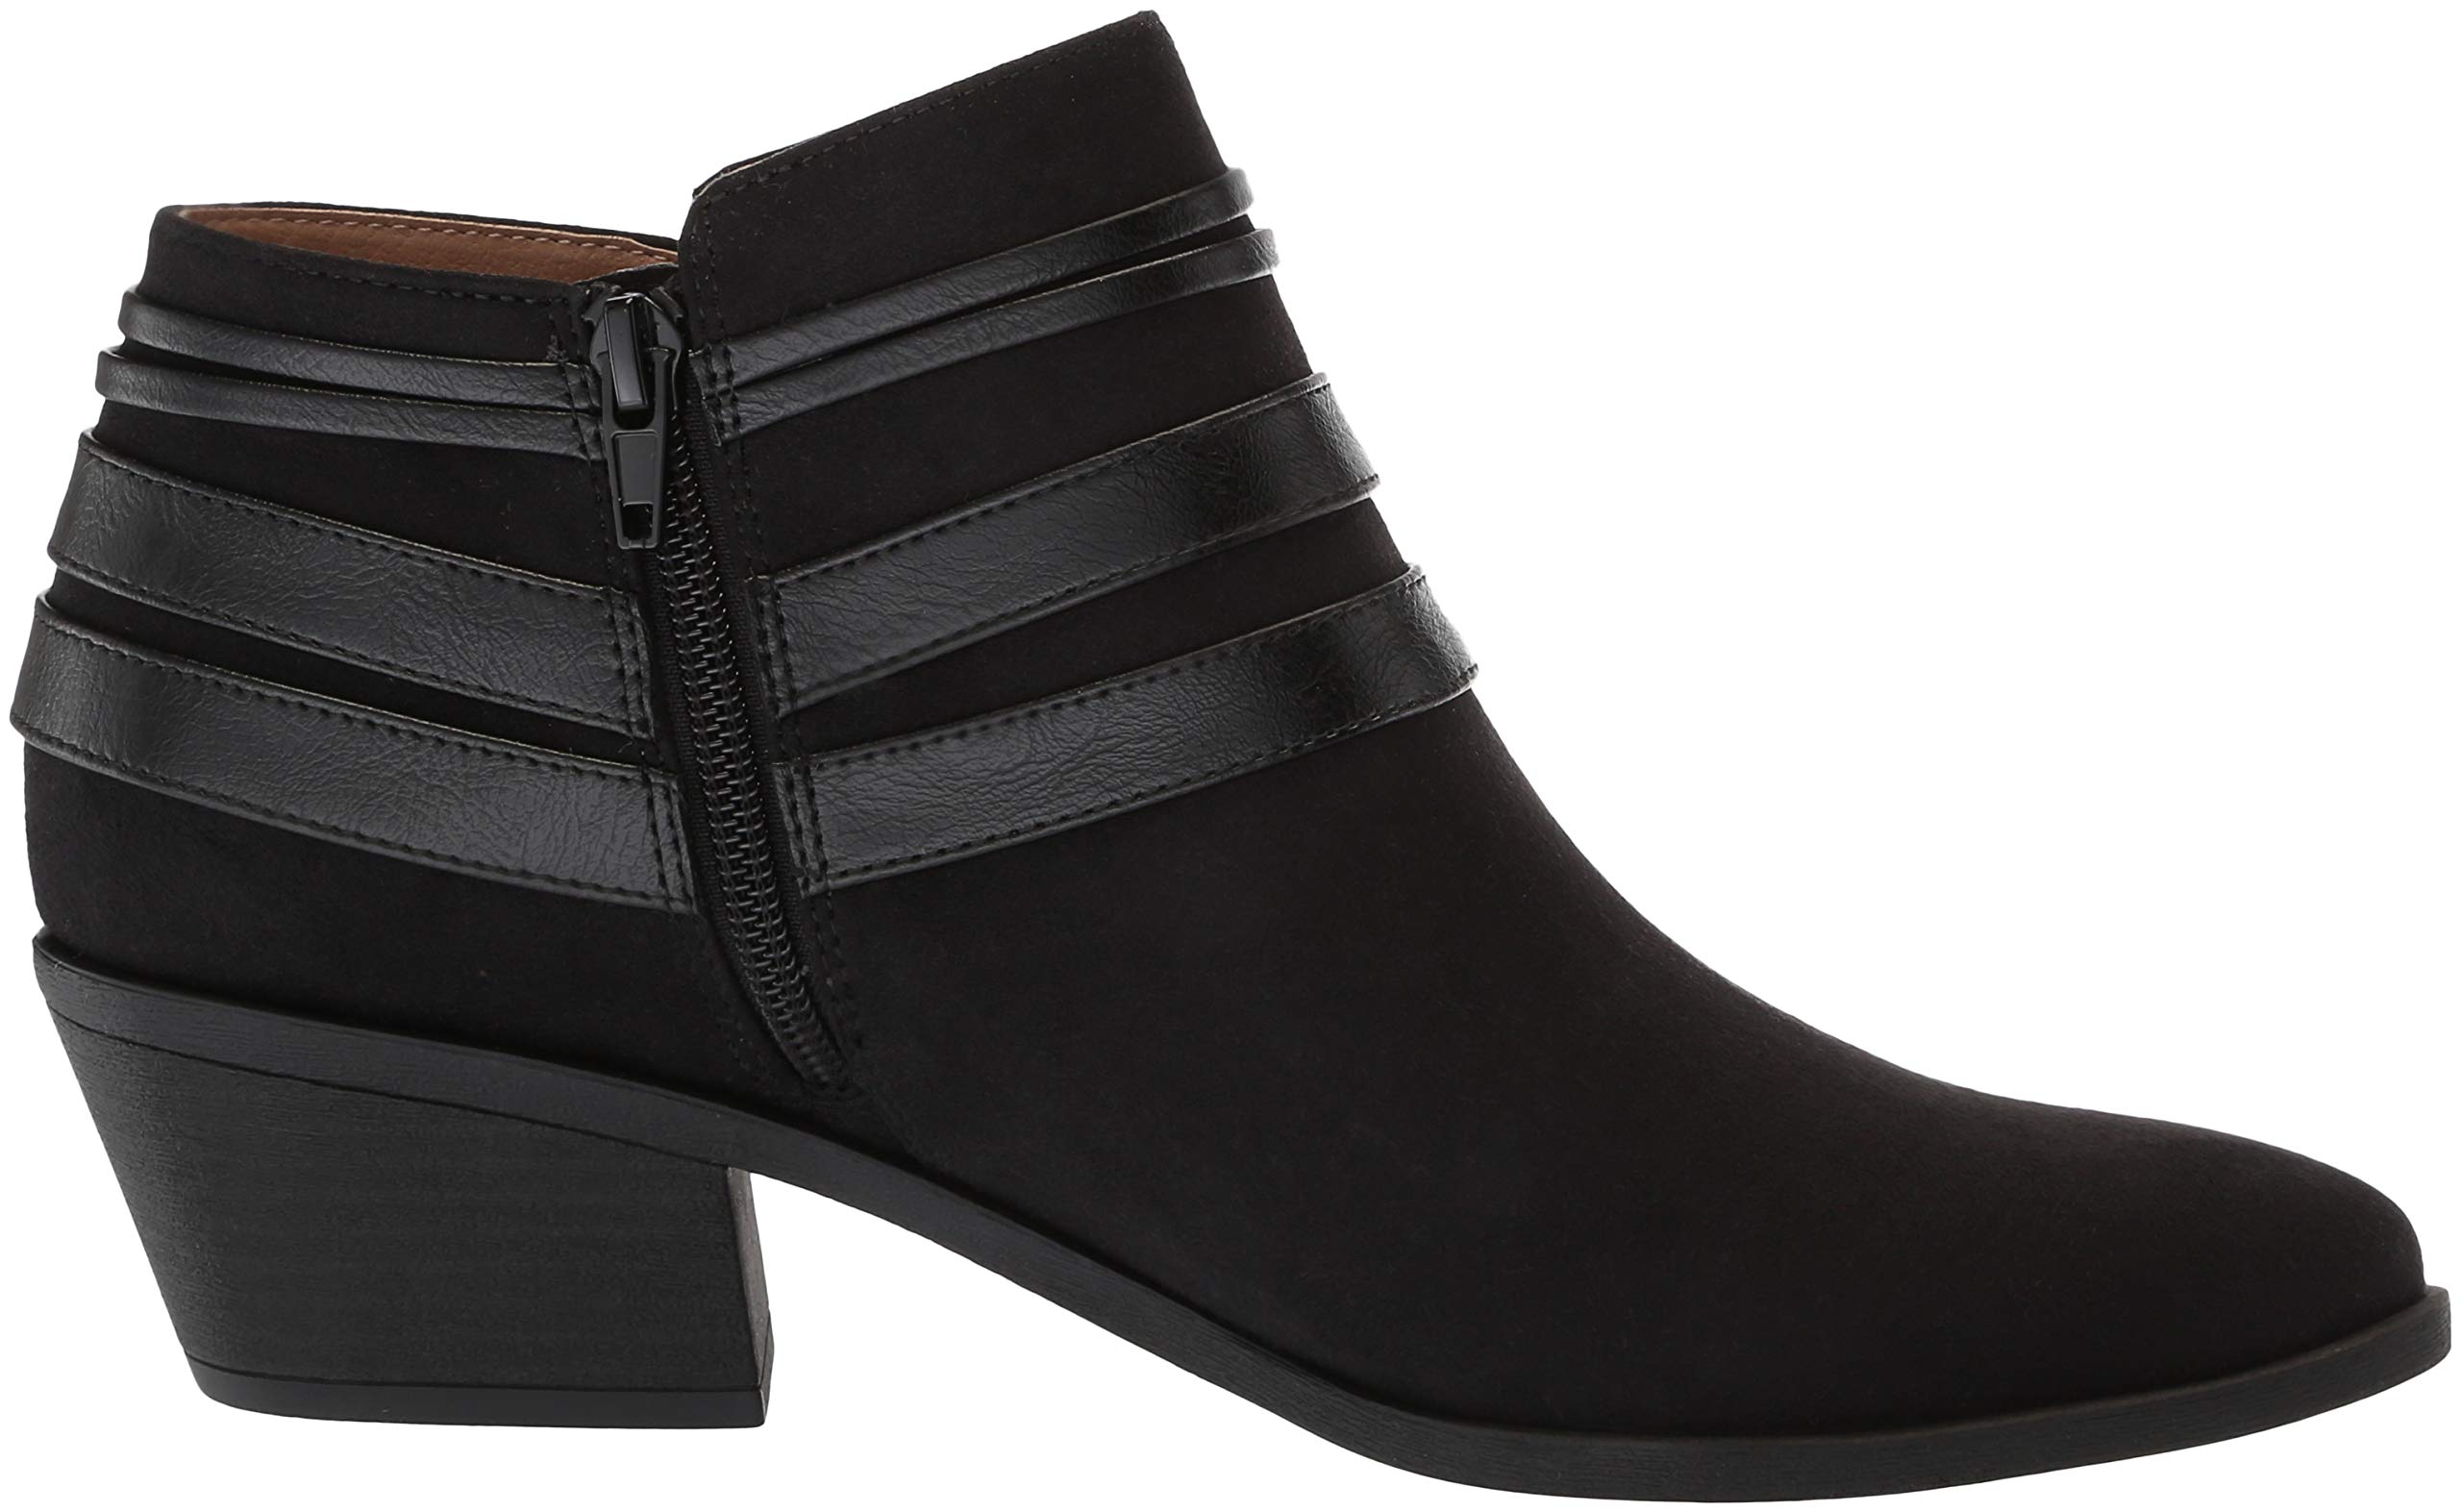 LifeStride Women's Paloma Ankle Bootie Boot